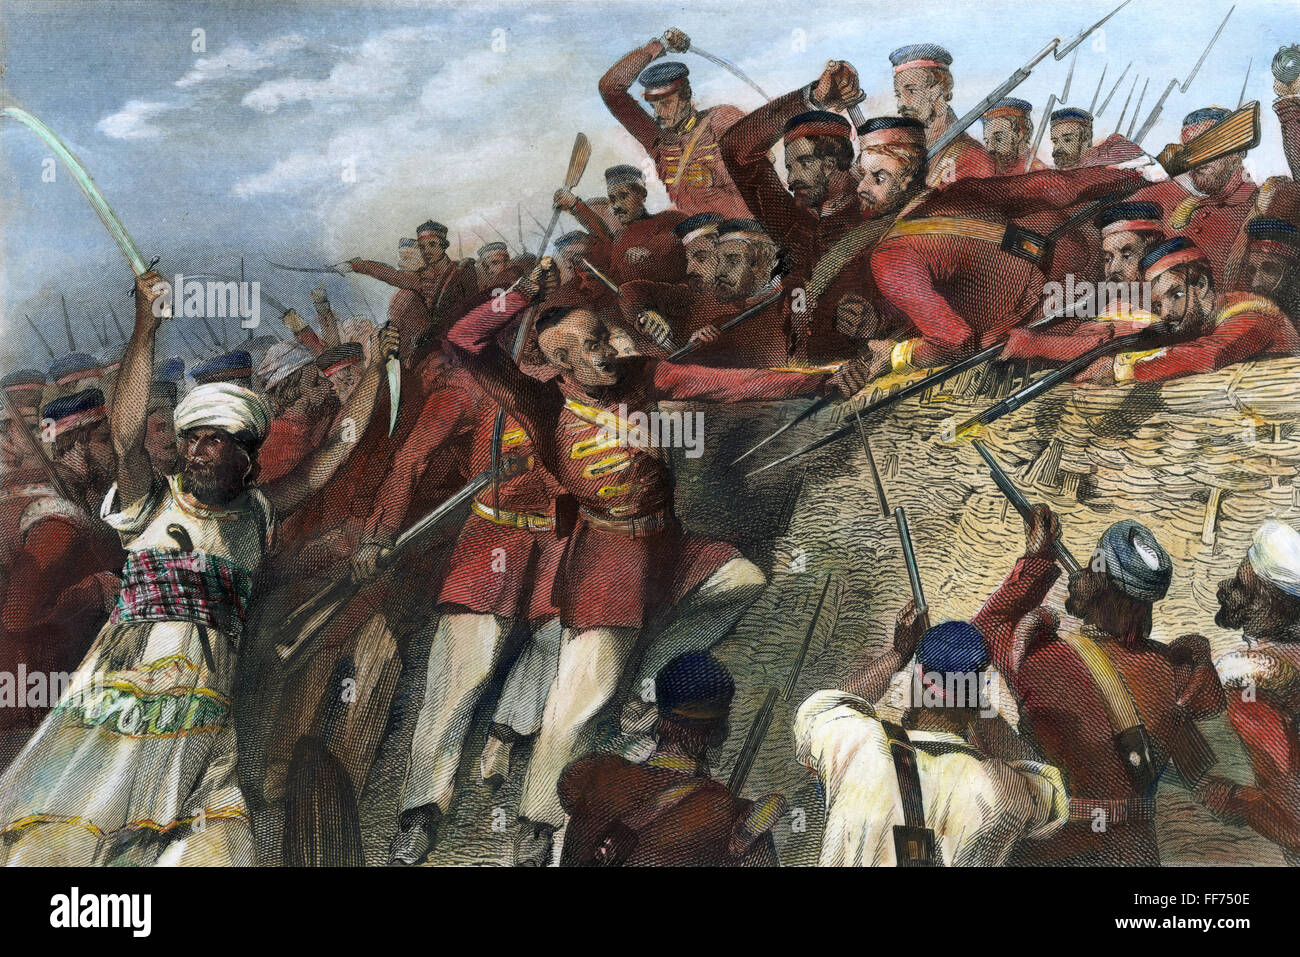 INDIA: SEPOY MUTINY, 1857. /nSepoy mutineers attacking the redan battery at Lucknow, India on 30 July 1857. Contemporary English colored engraving. Stock Photo